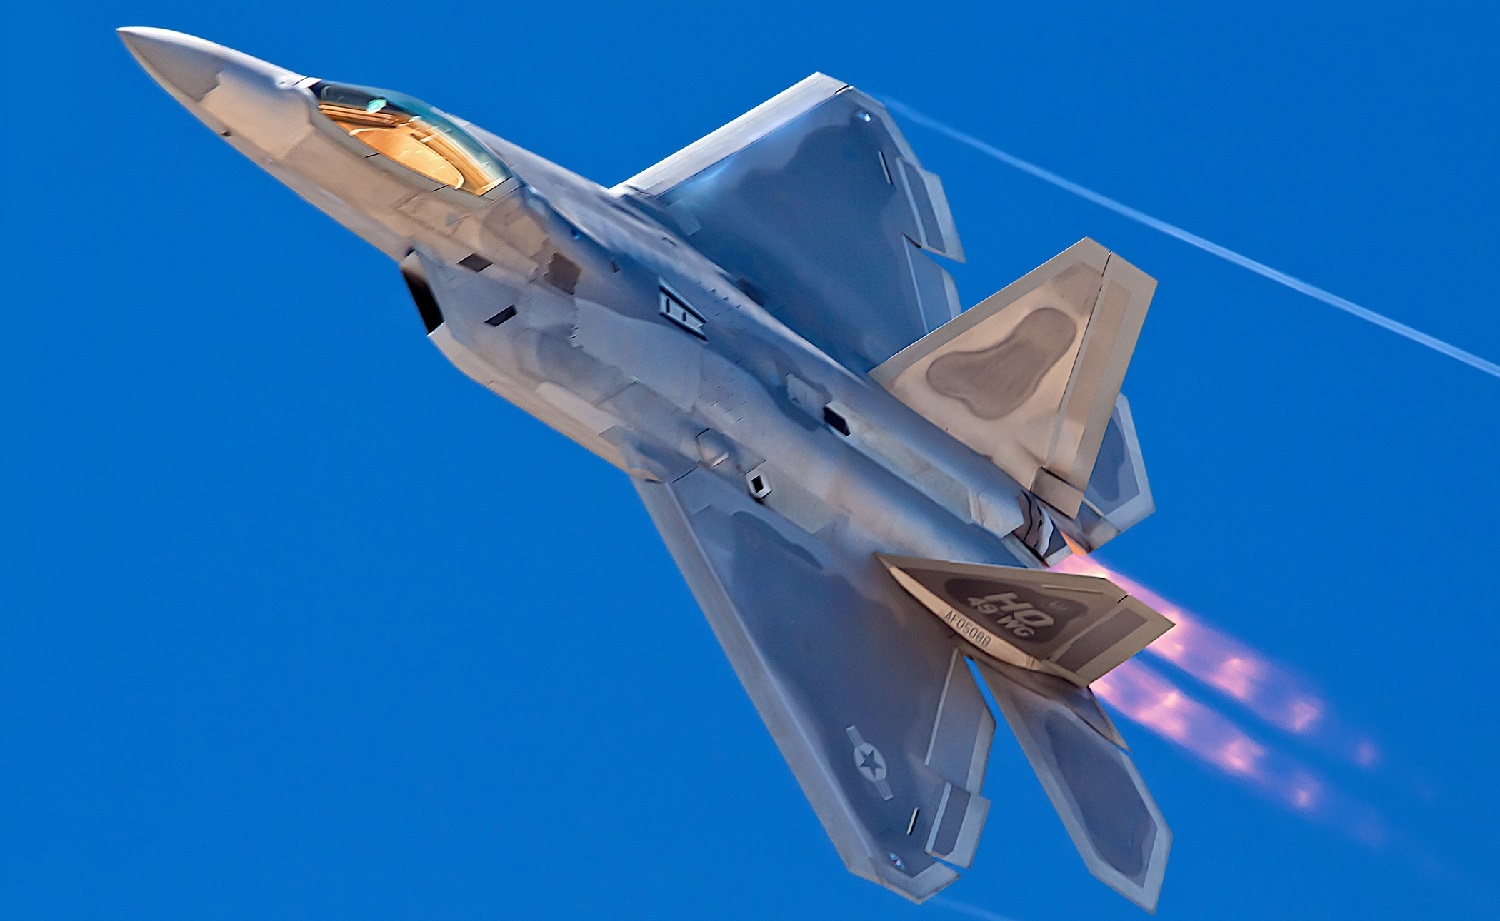 Air Force F 22 Raptor Is Now Being Armed With New Long Range Precision Attack Technology The National Interest